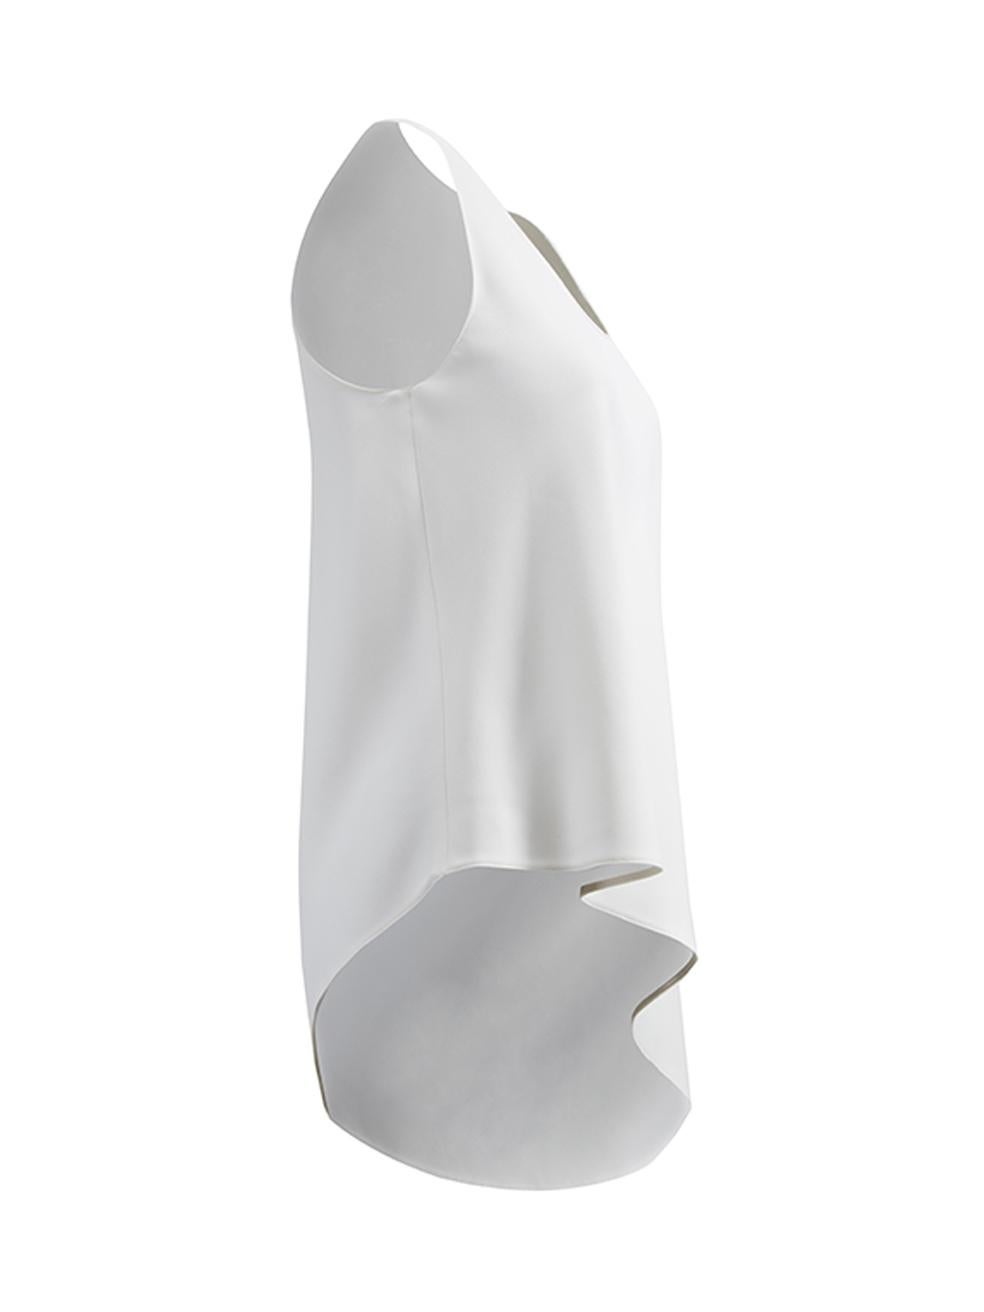 CONDITION is Very good. Hardly any visible wear to top is evident. There is a small mark at the bottom of the draped material on this used Balenciaga designer resale item. Details 2014 White Polyester Tank top Round neckline Asymmetric droopy tail